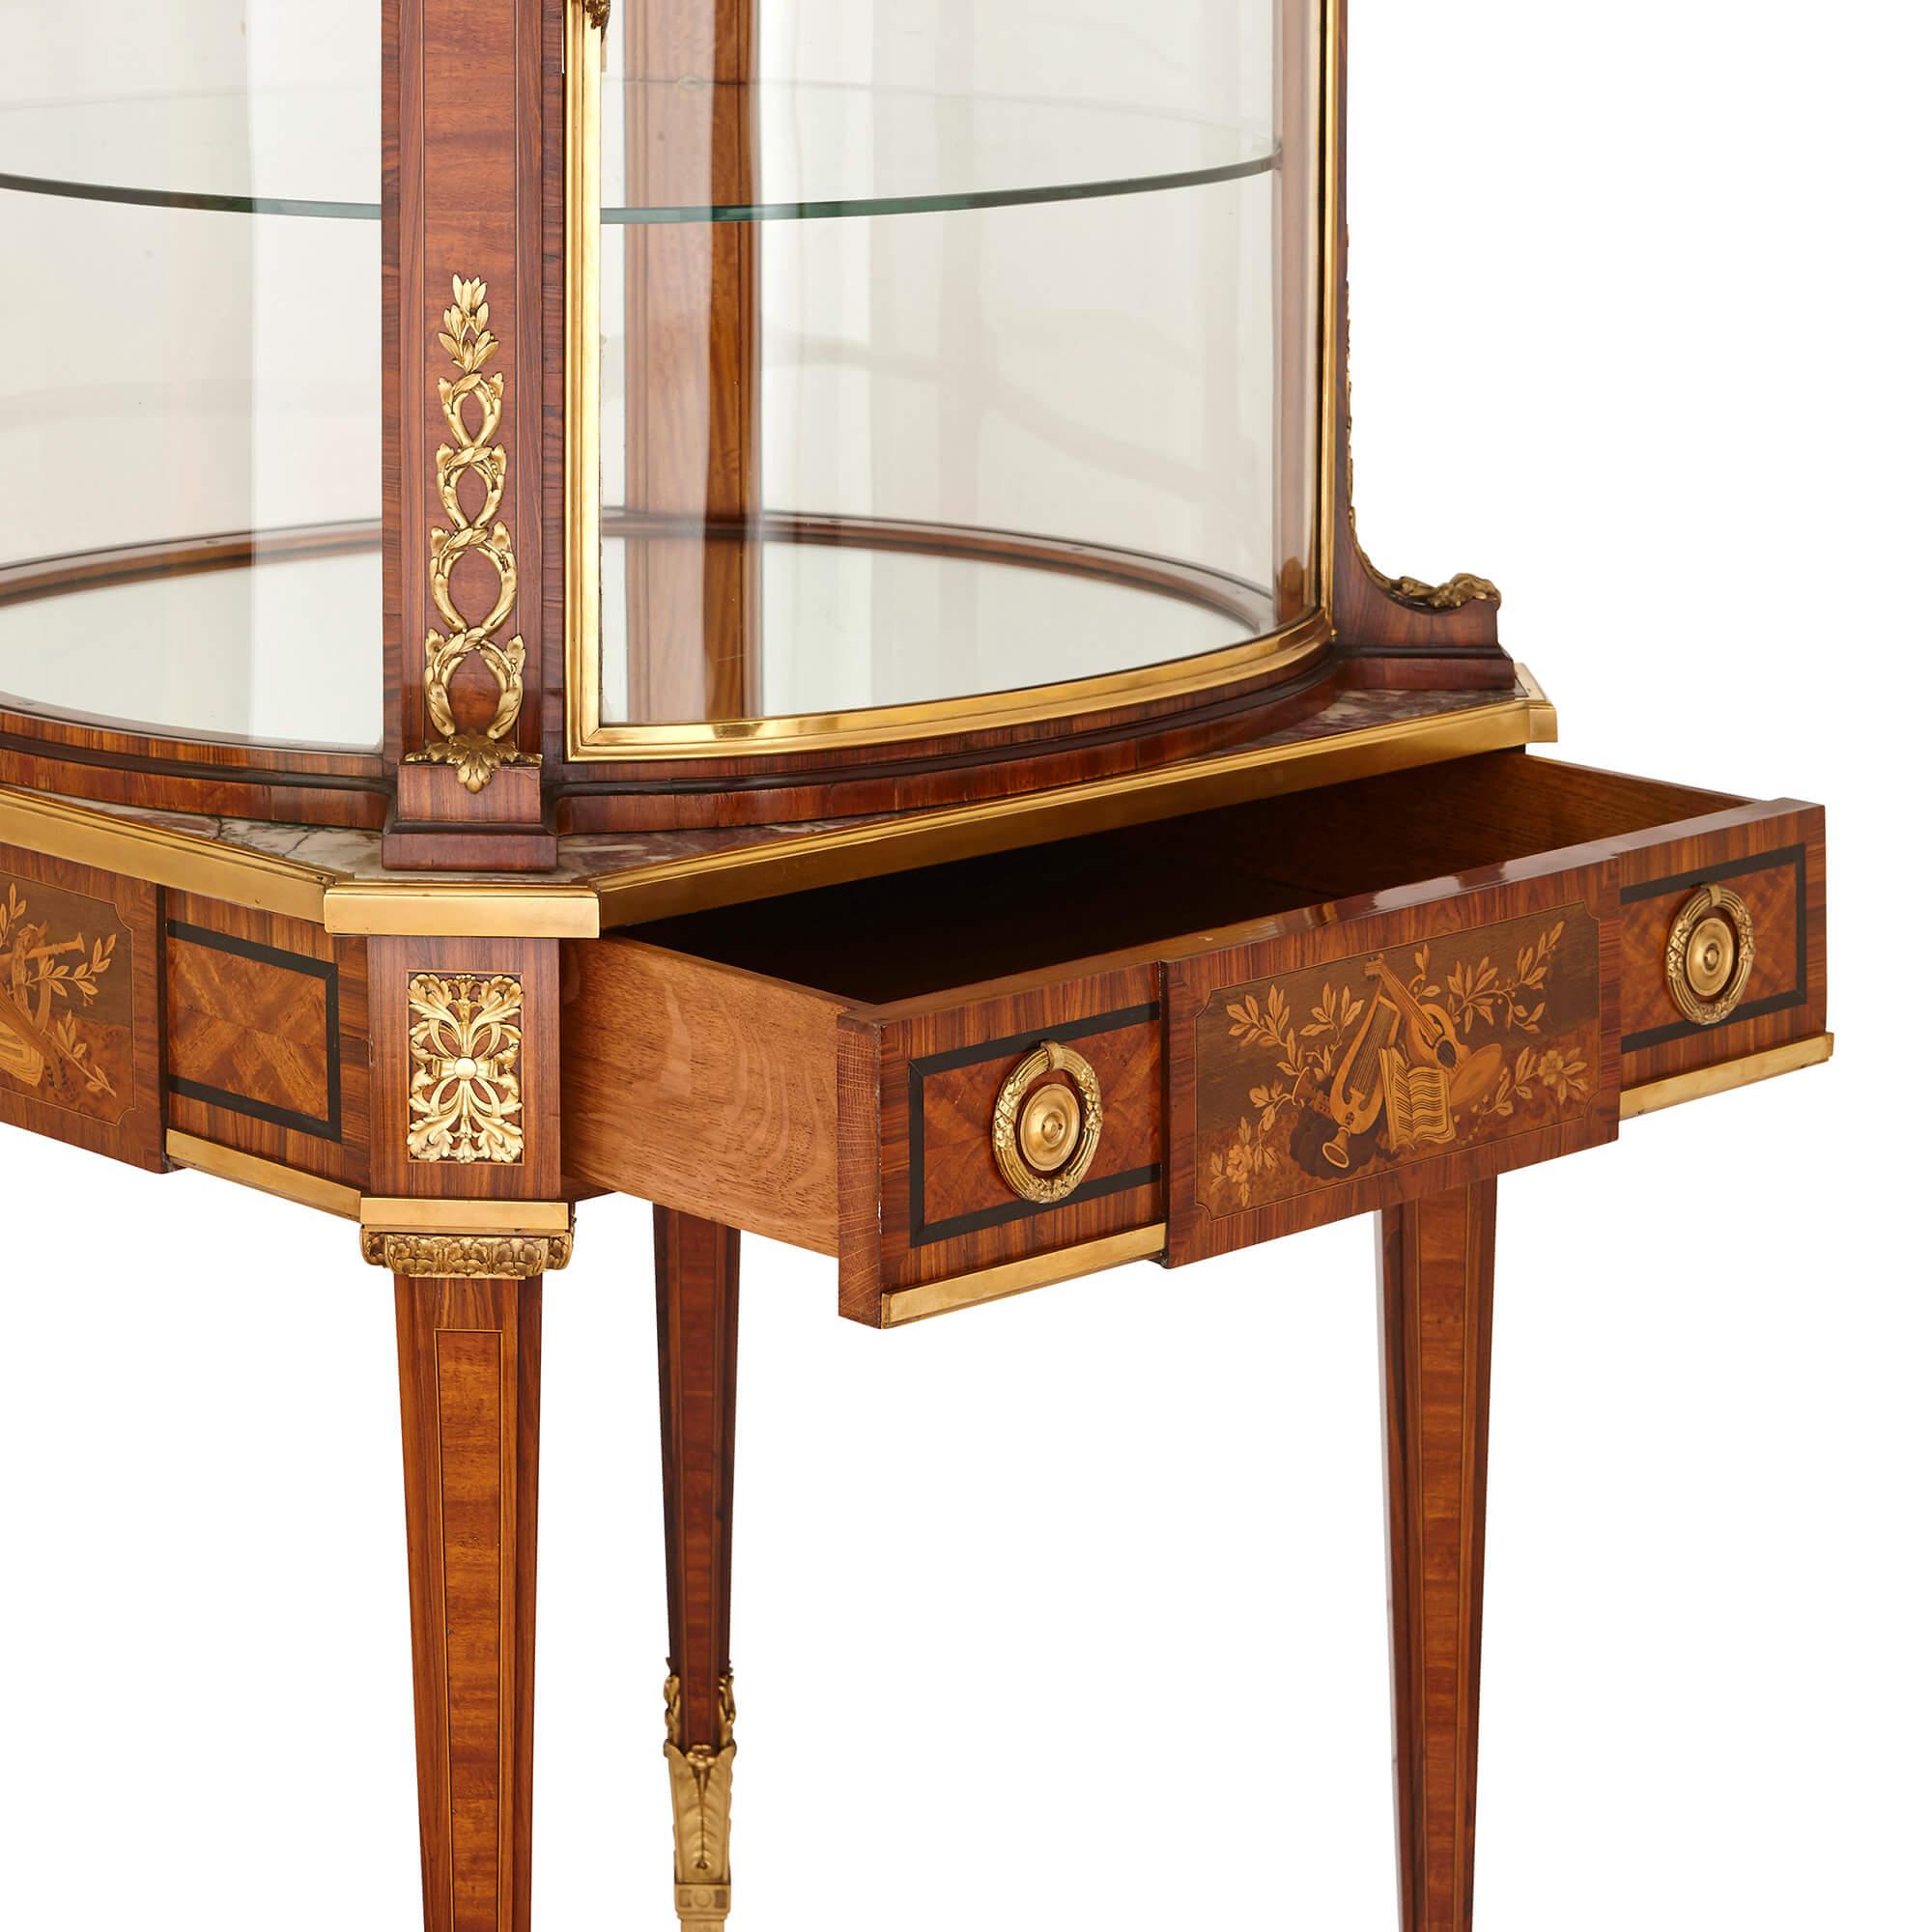 Belle Époque Gilt Bronze-Mounted Display Cabinet on Table